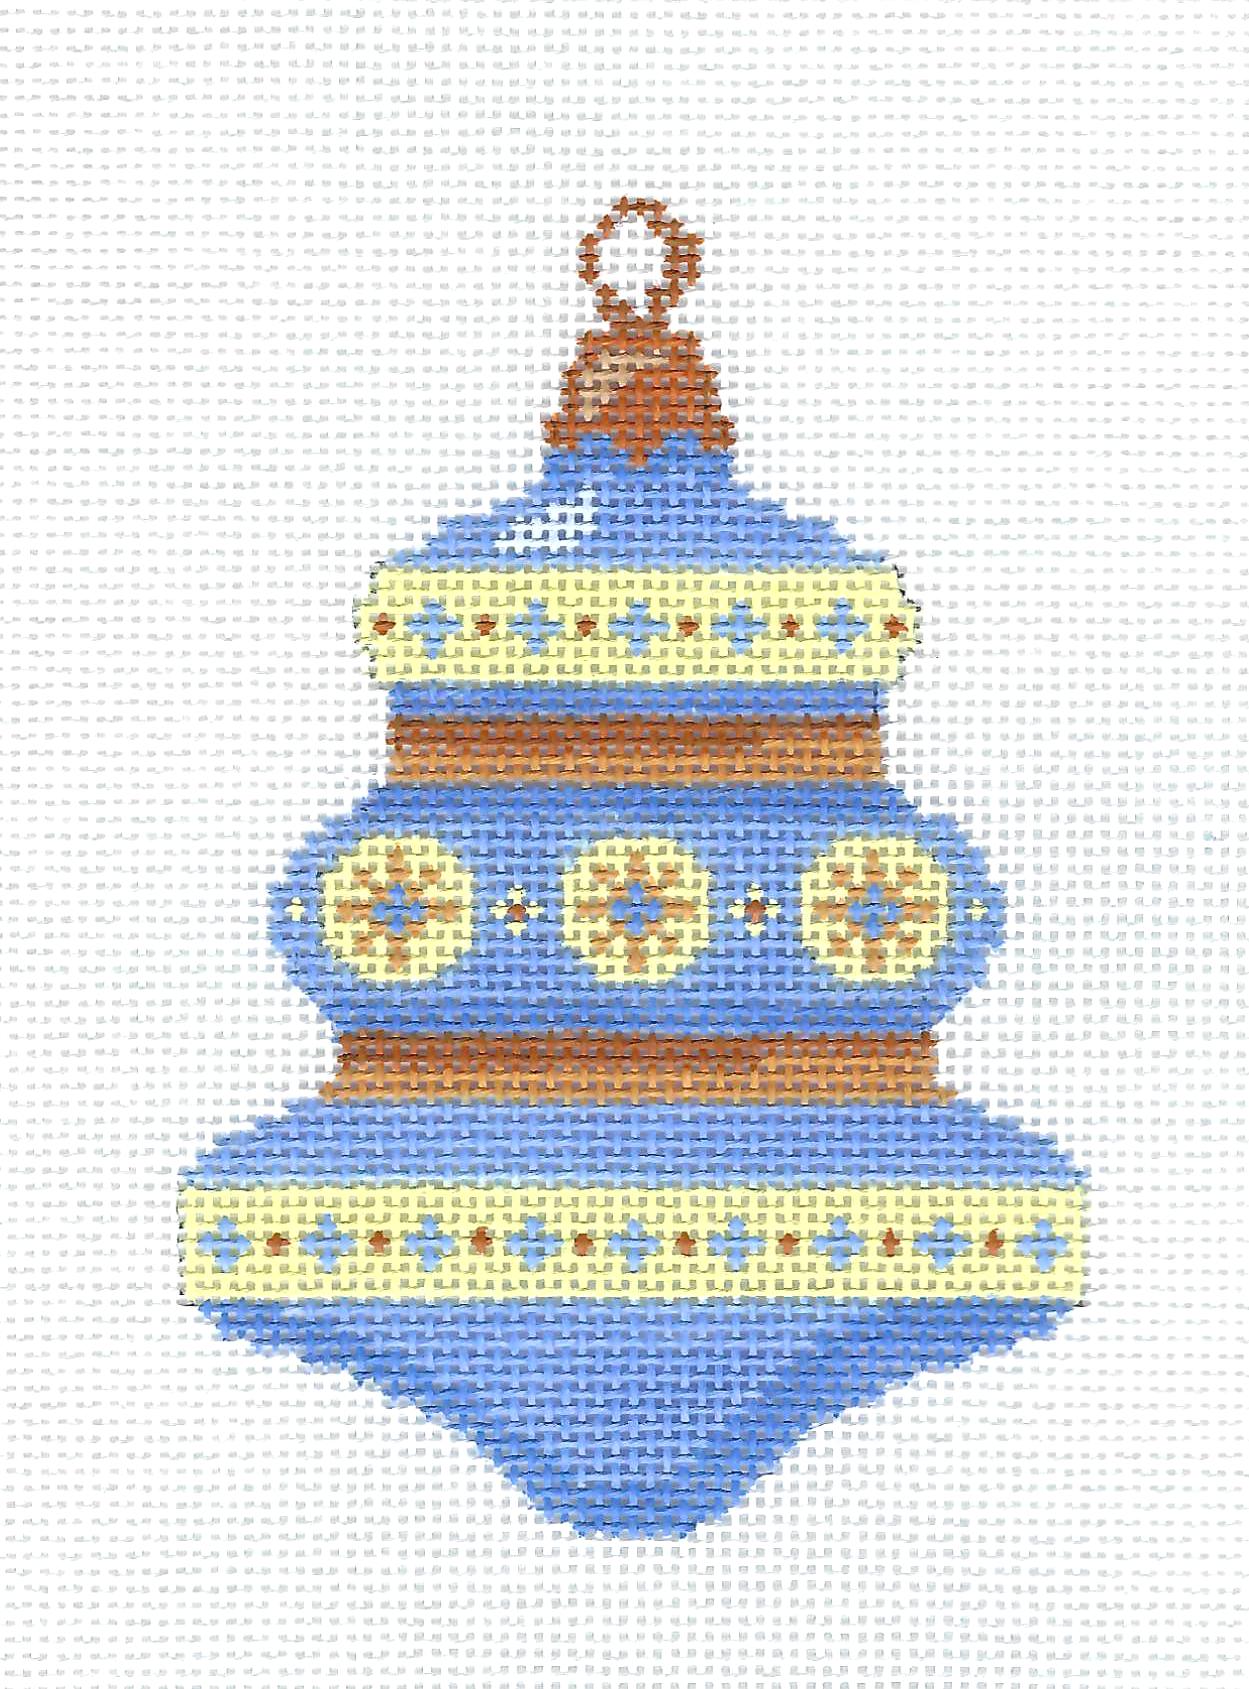 Blue, Yellow & Gold handpainted Needlepoint Ornament Canvas by Abigail Cecile from PLD